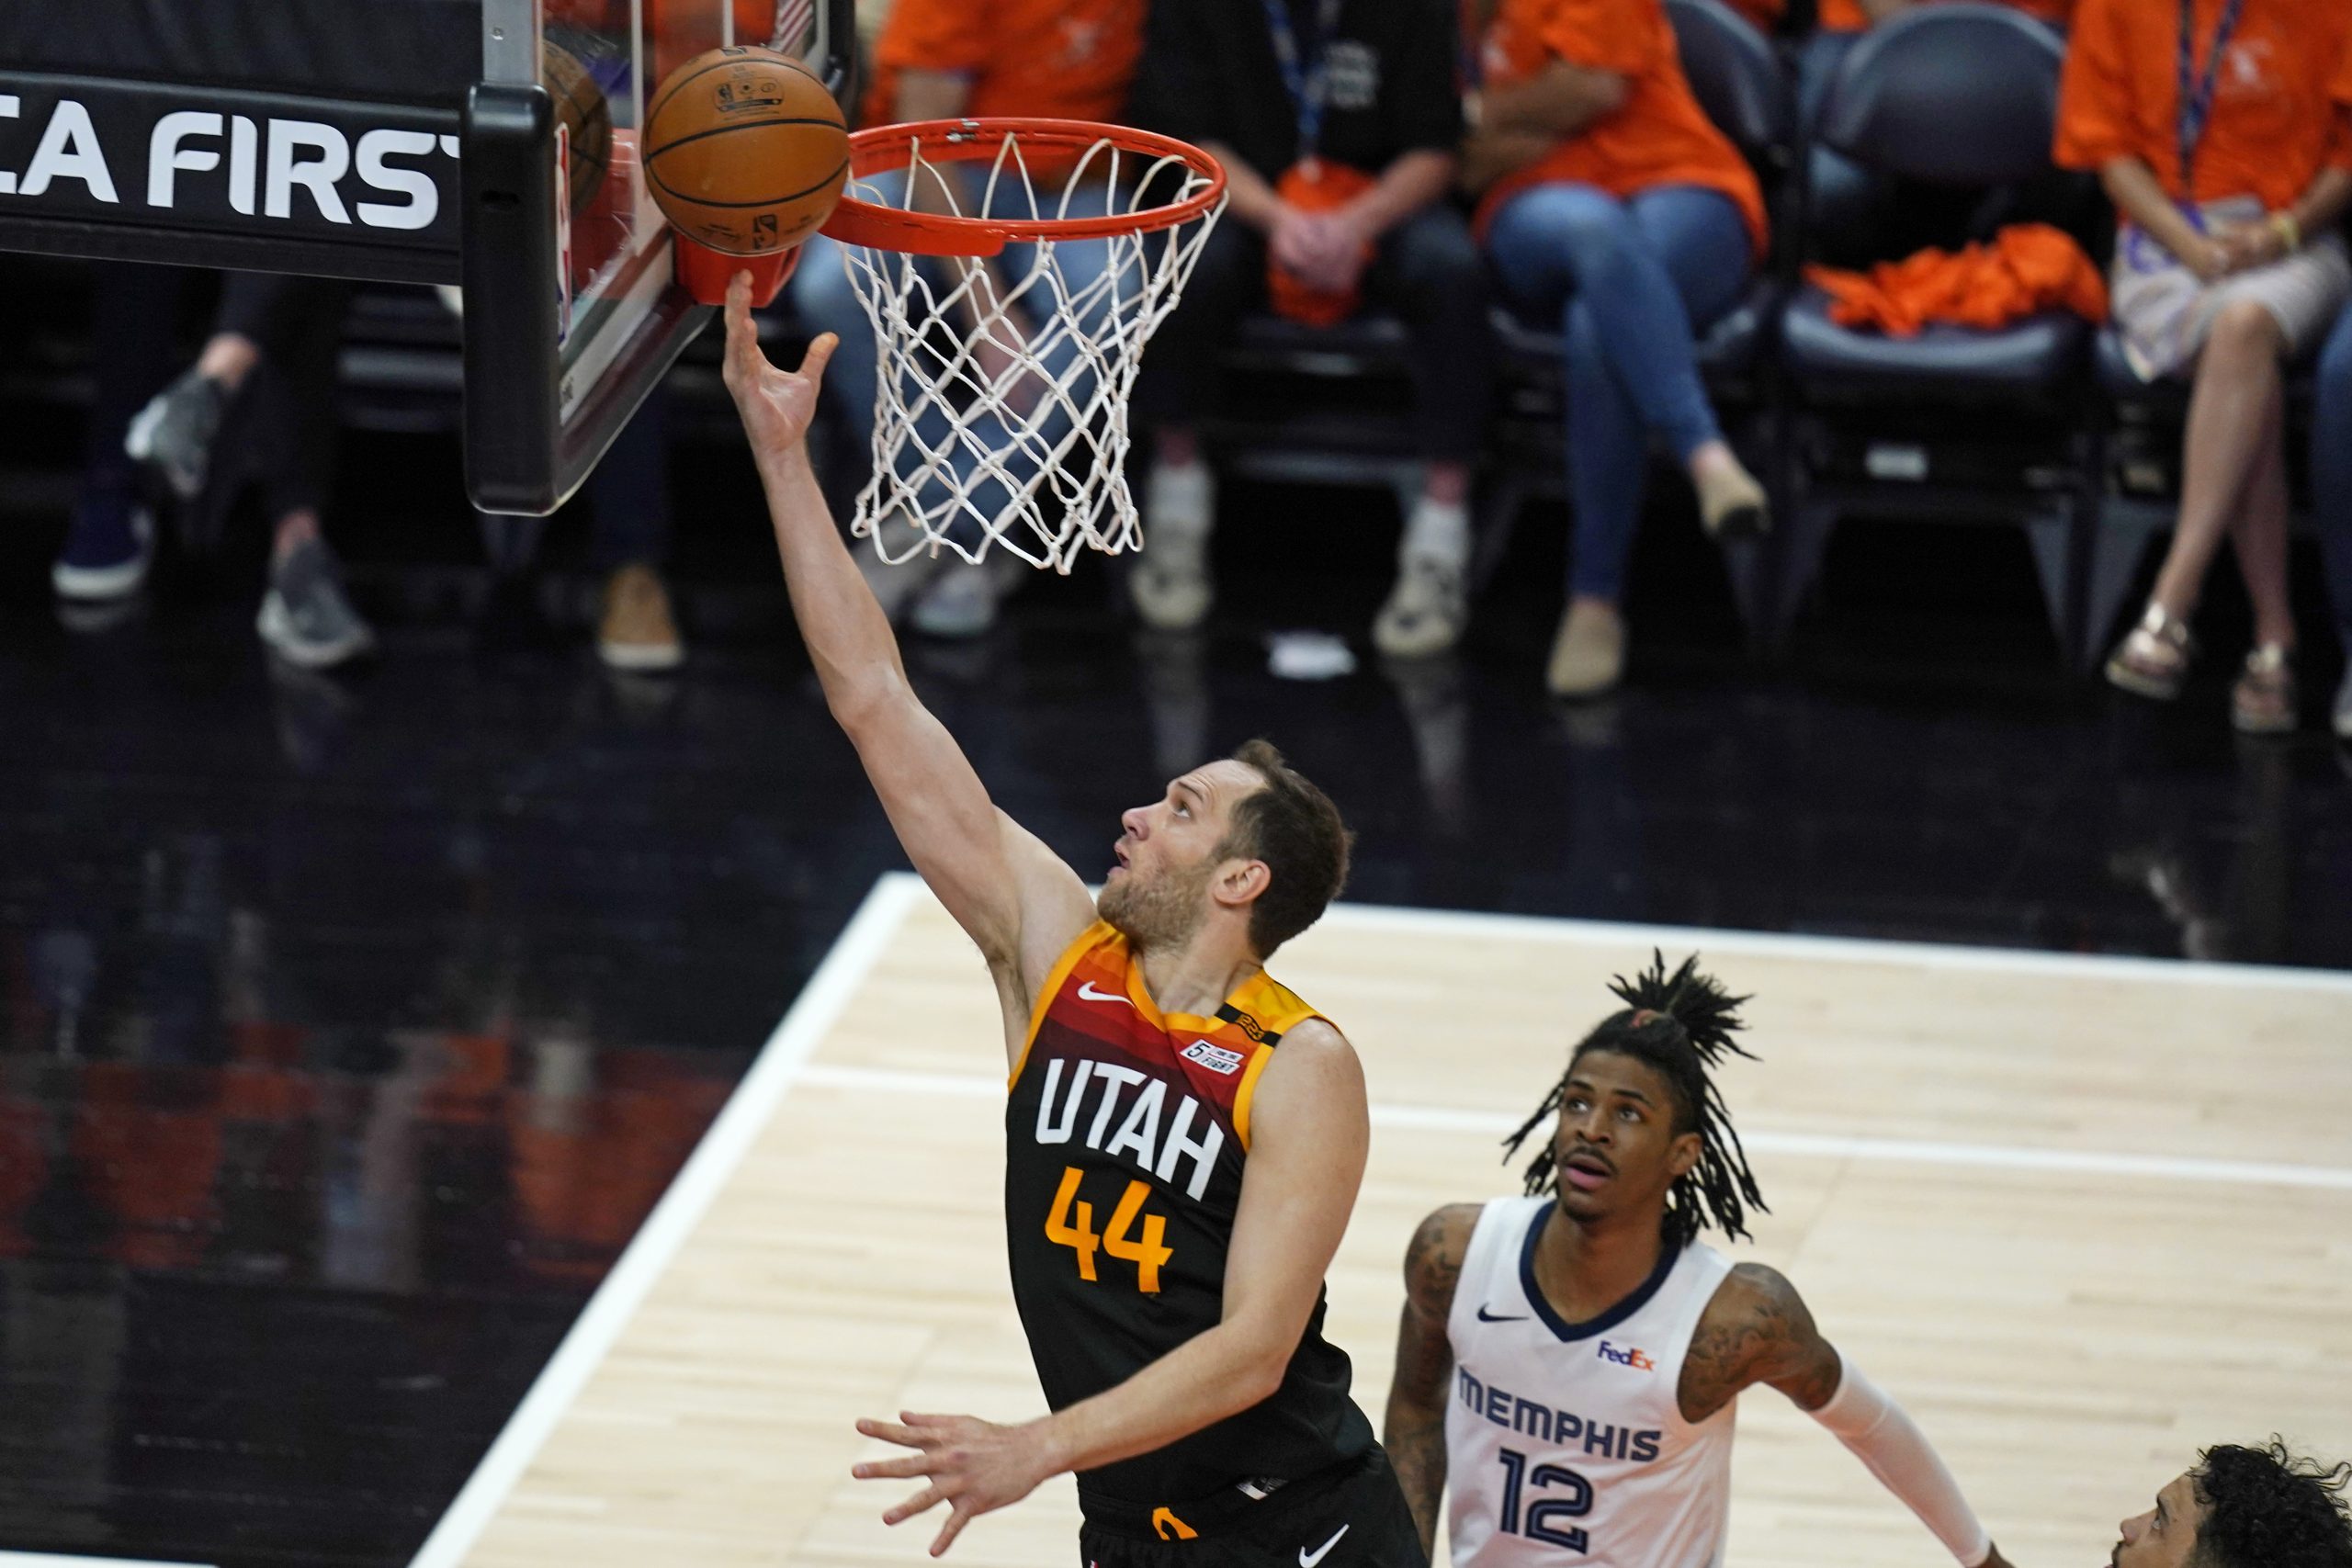 Utah Jazz forward Bojan Bogdanovic (44) lays the ball up as Memphis Grizzlies guard Ja Morant (12) watches during the first half of Game 5 of an NBA basketball first-round playoff series Wednesday, June 2, 2021, in Salt Lake City. (AP Photo/Rick Bowmer)